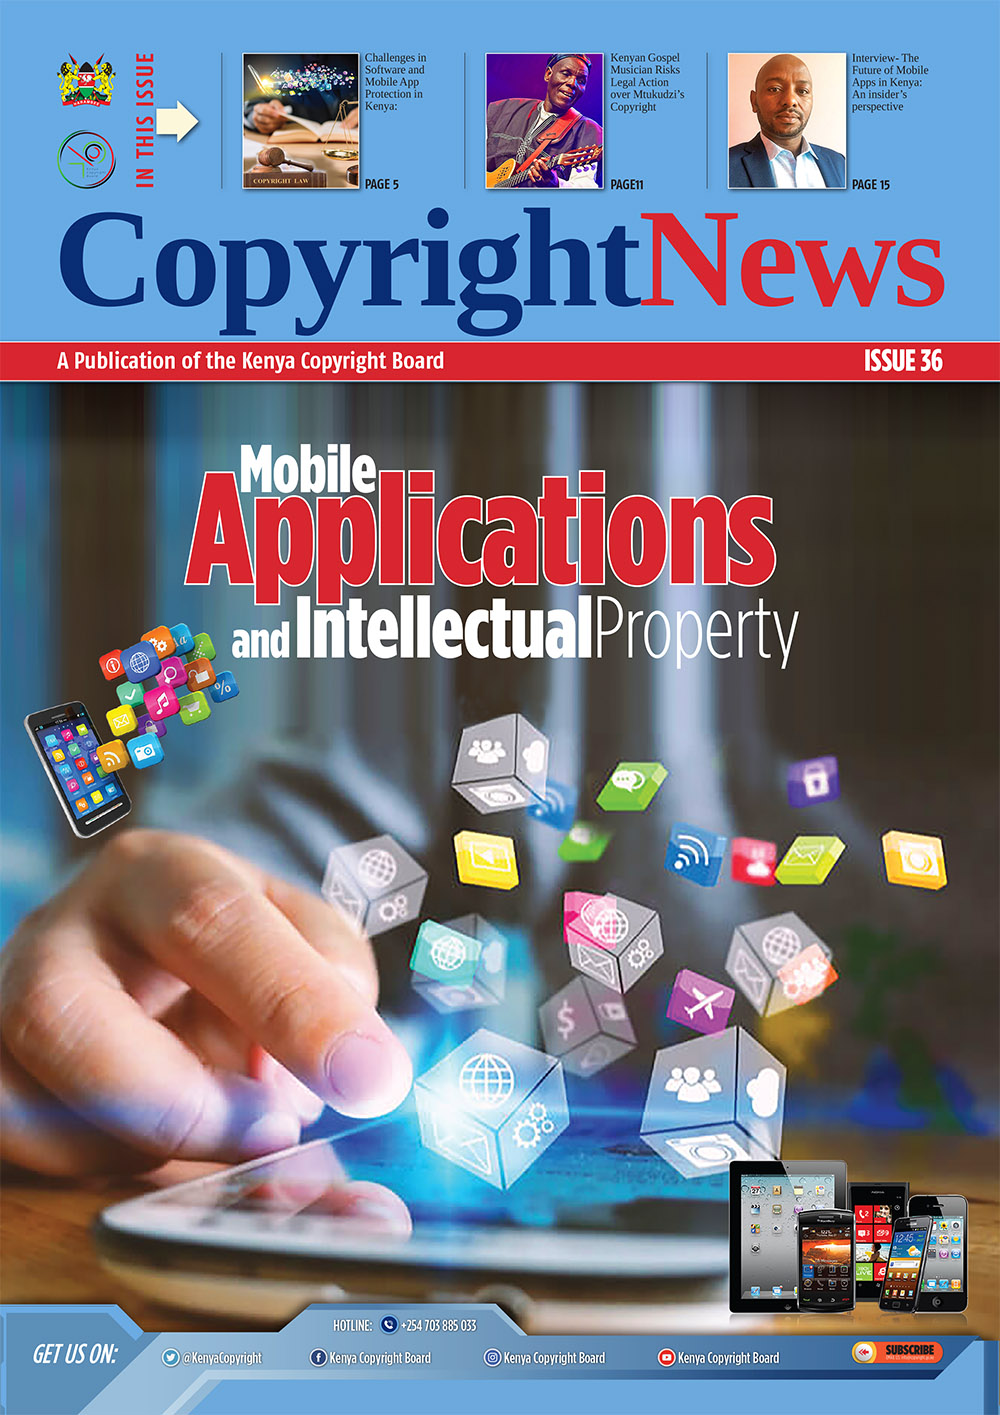 Issue 36: Mobile Applications and Intellectual Property